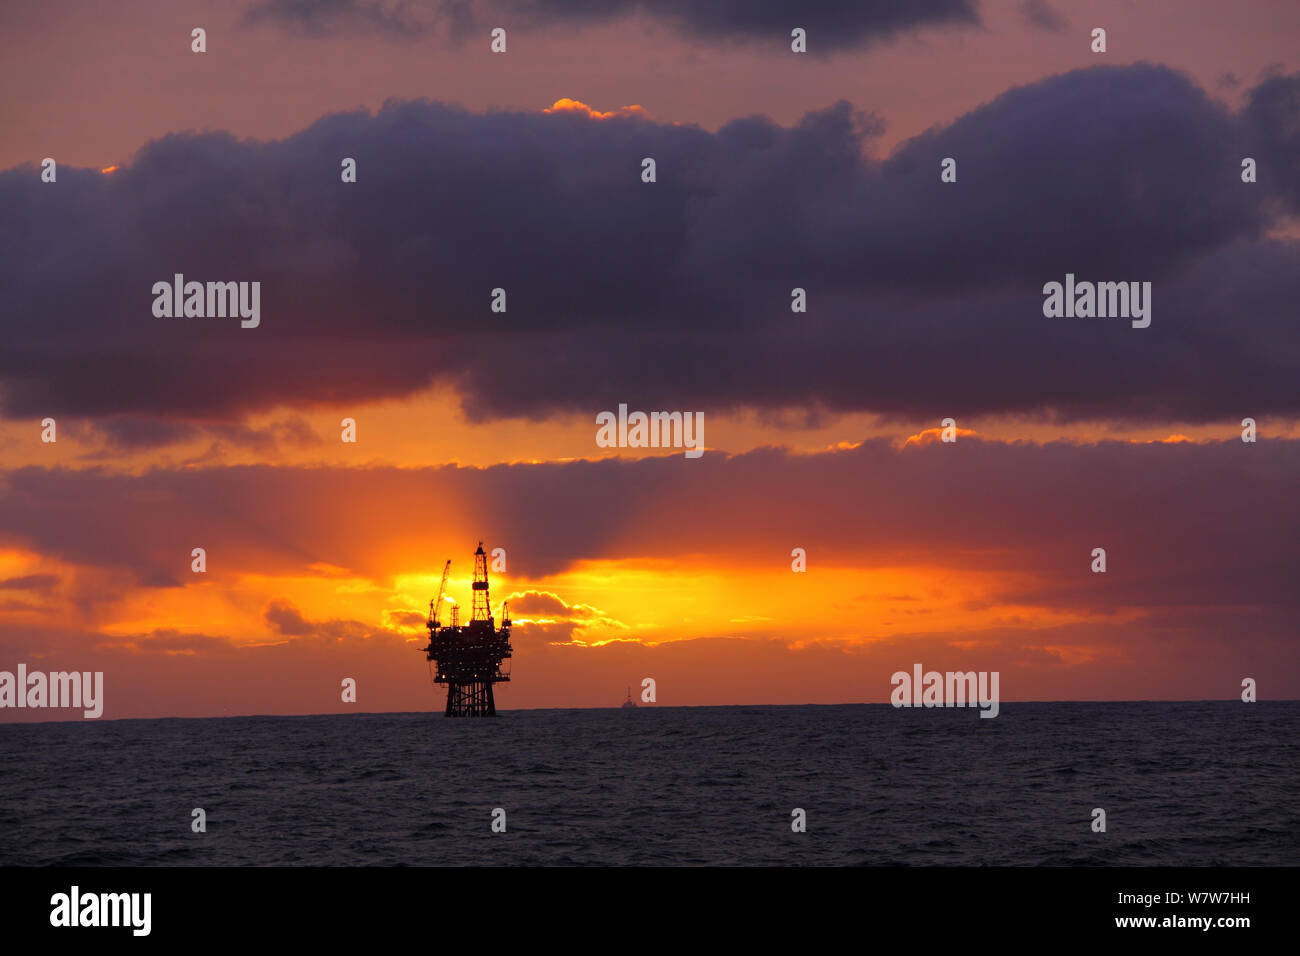 Sunrise at the Eider platform, 60 miles northeast of Shetland, North Sea, November 2013. All non-editorial uses must be cleared individually. Stock Photo